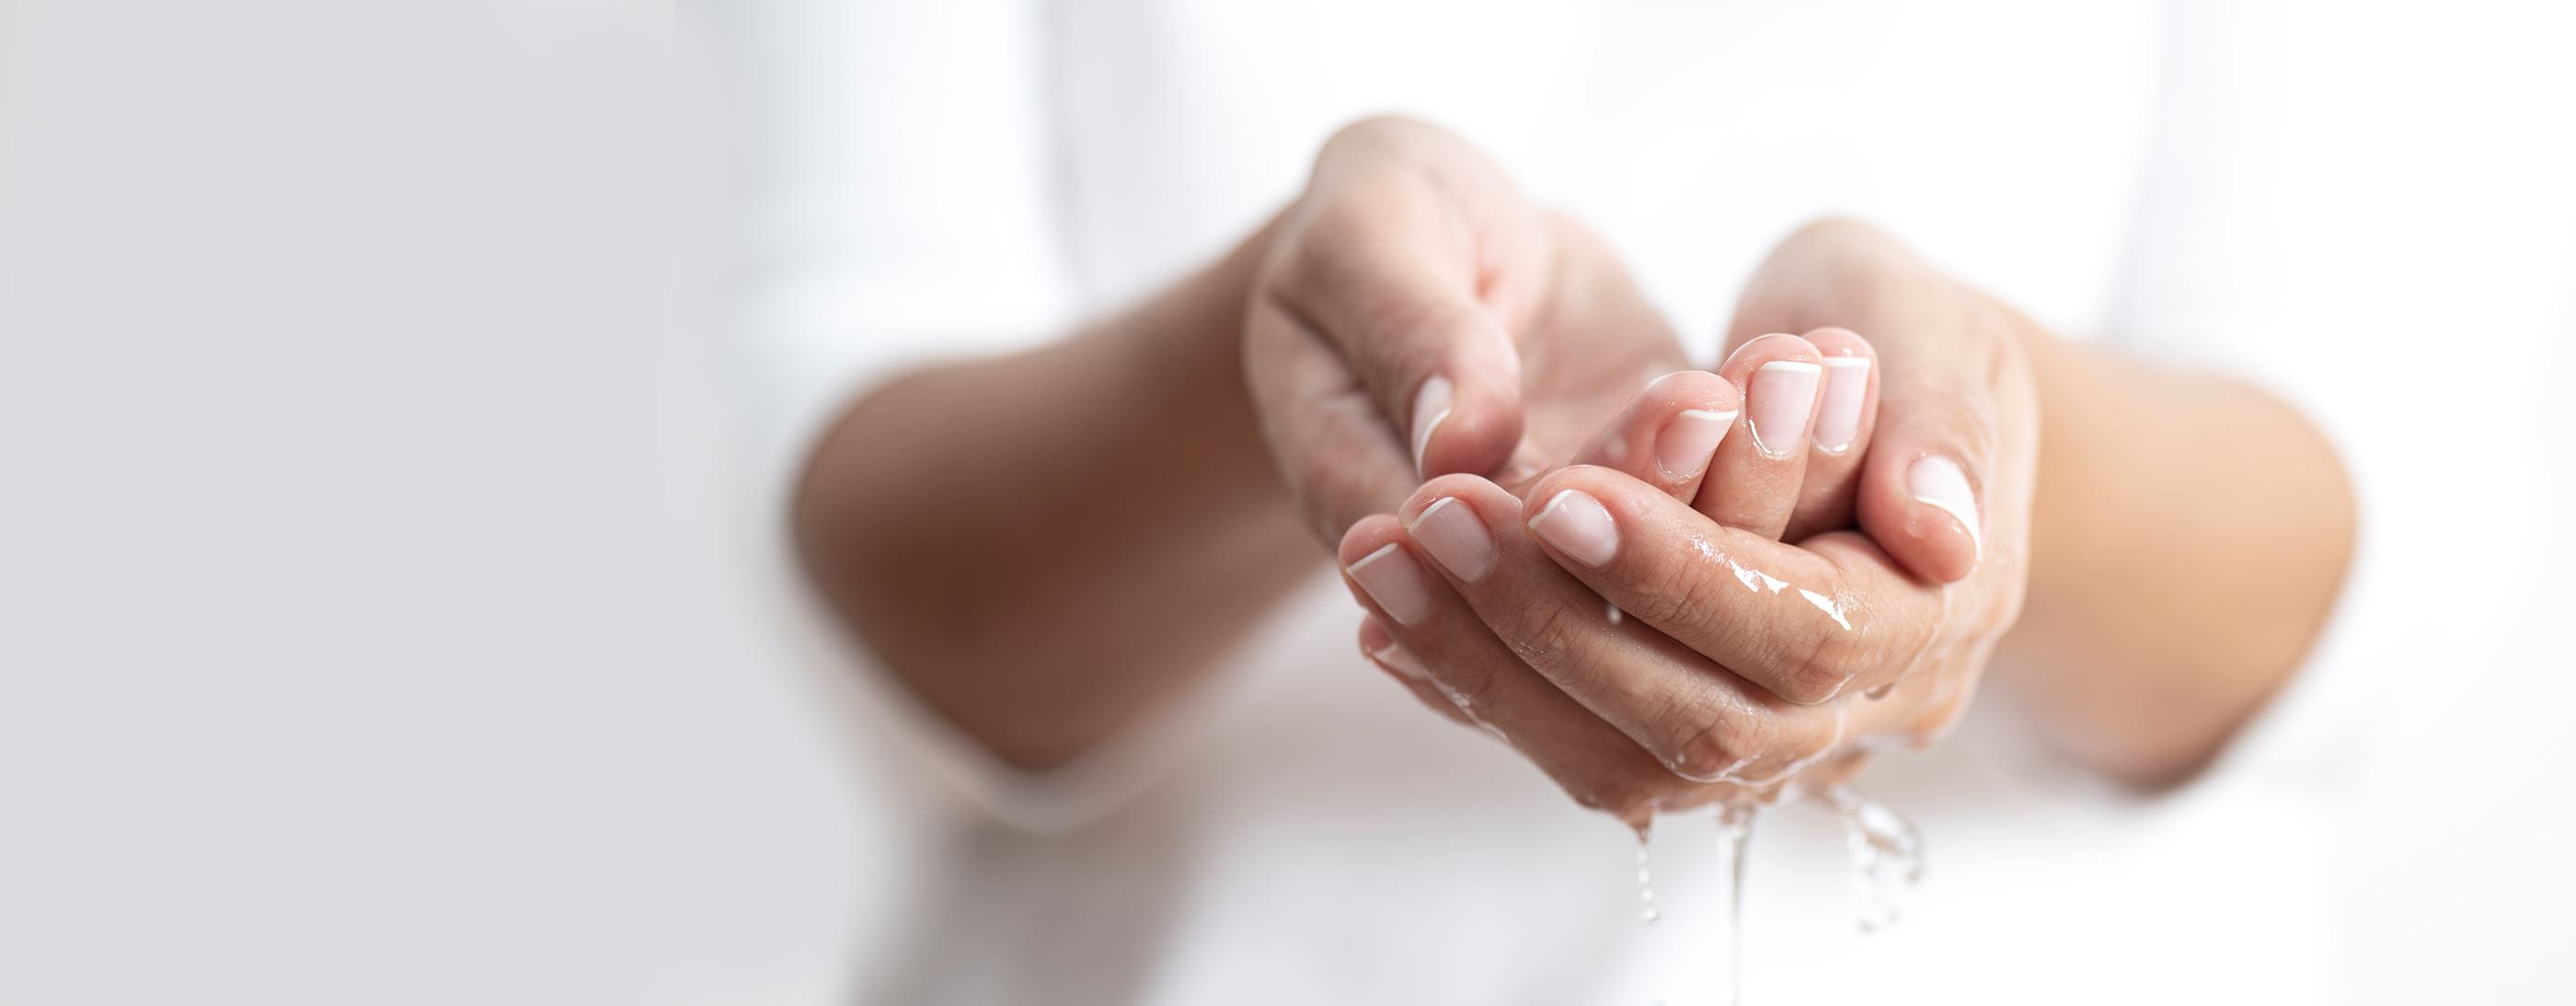 5 Important Tips for Healthy Beautiful Hands and Nails!